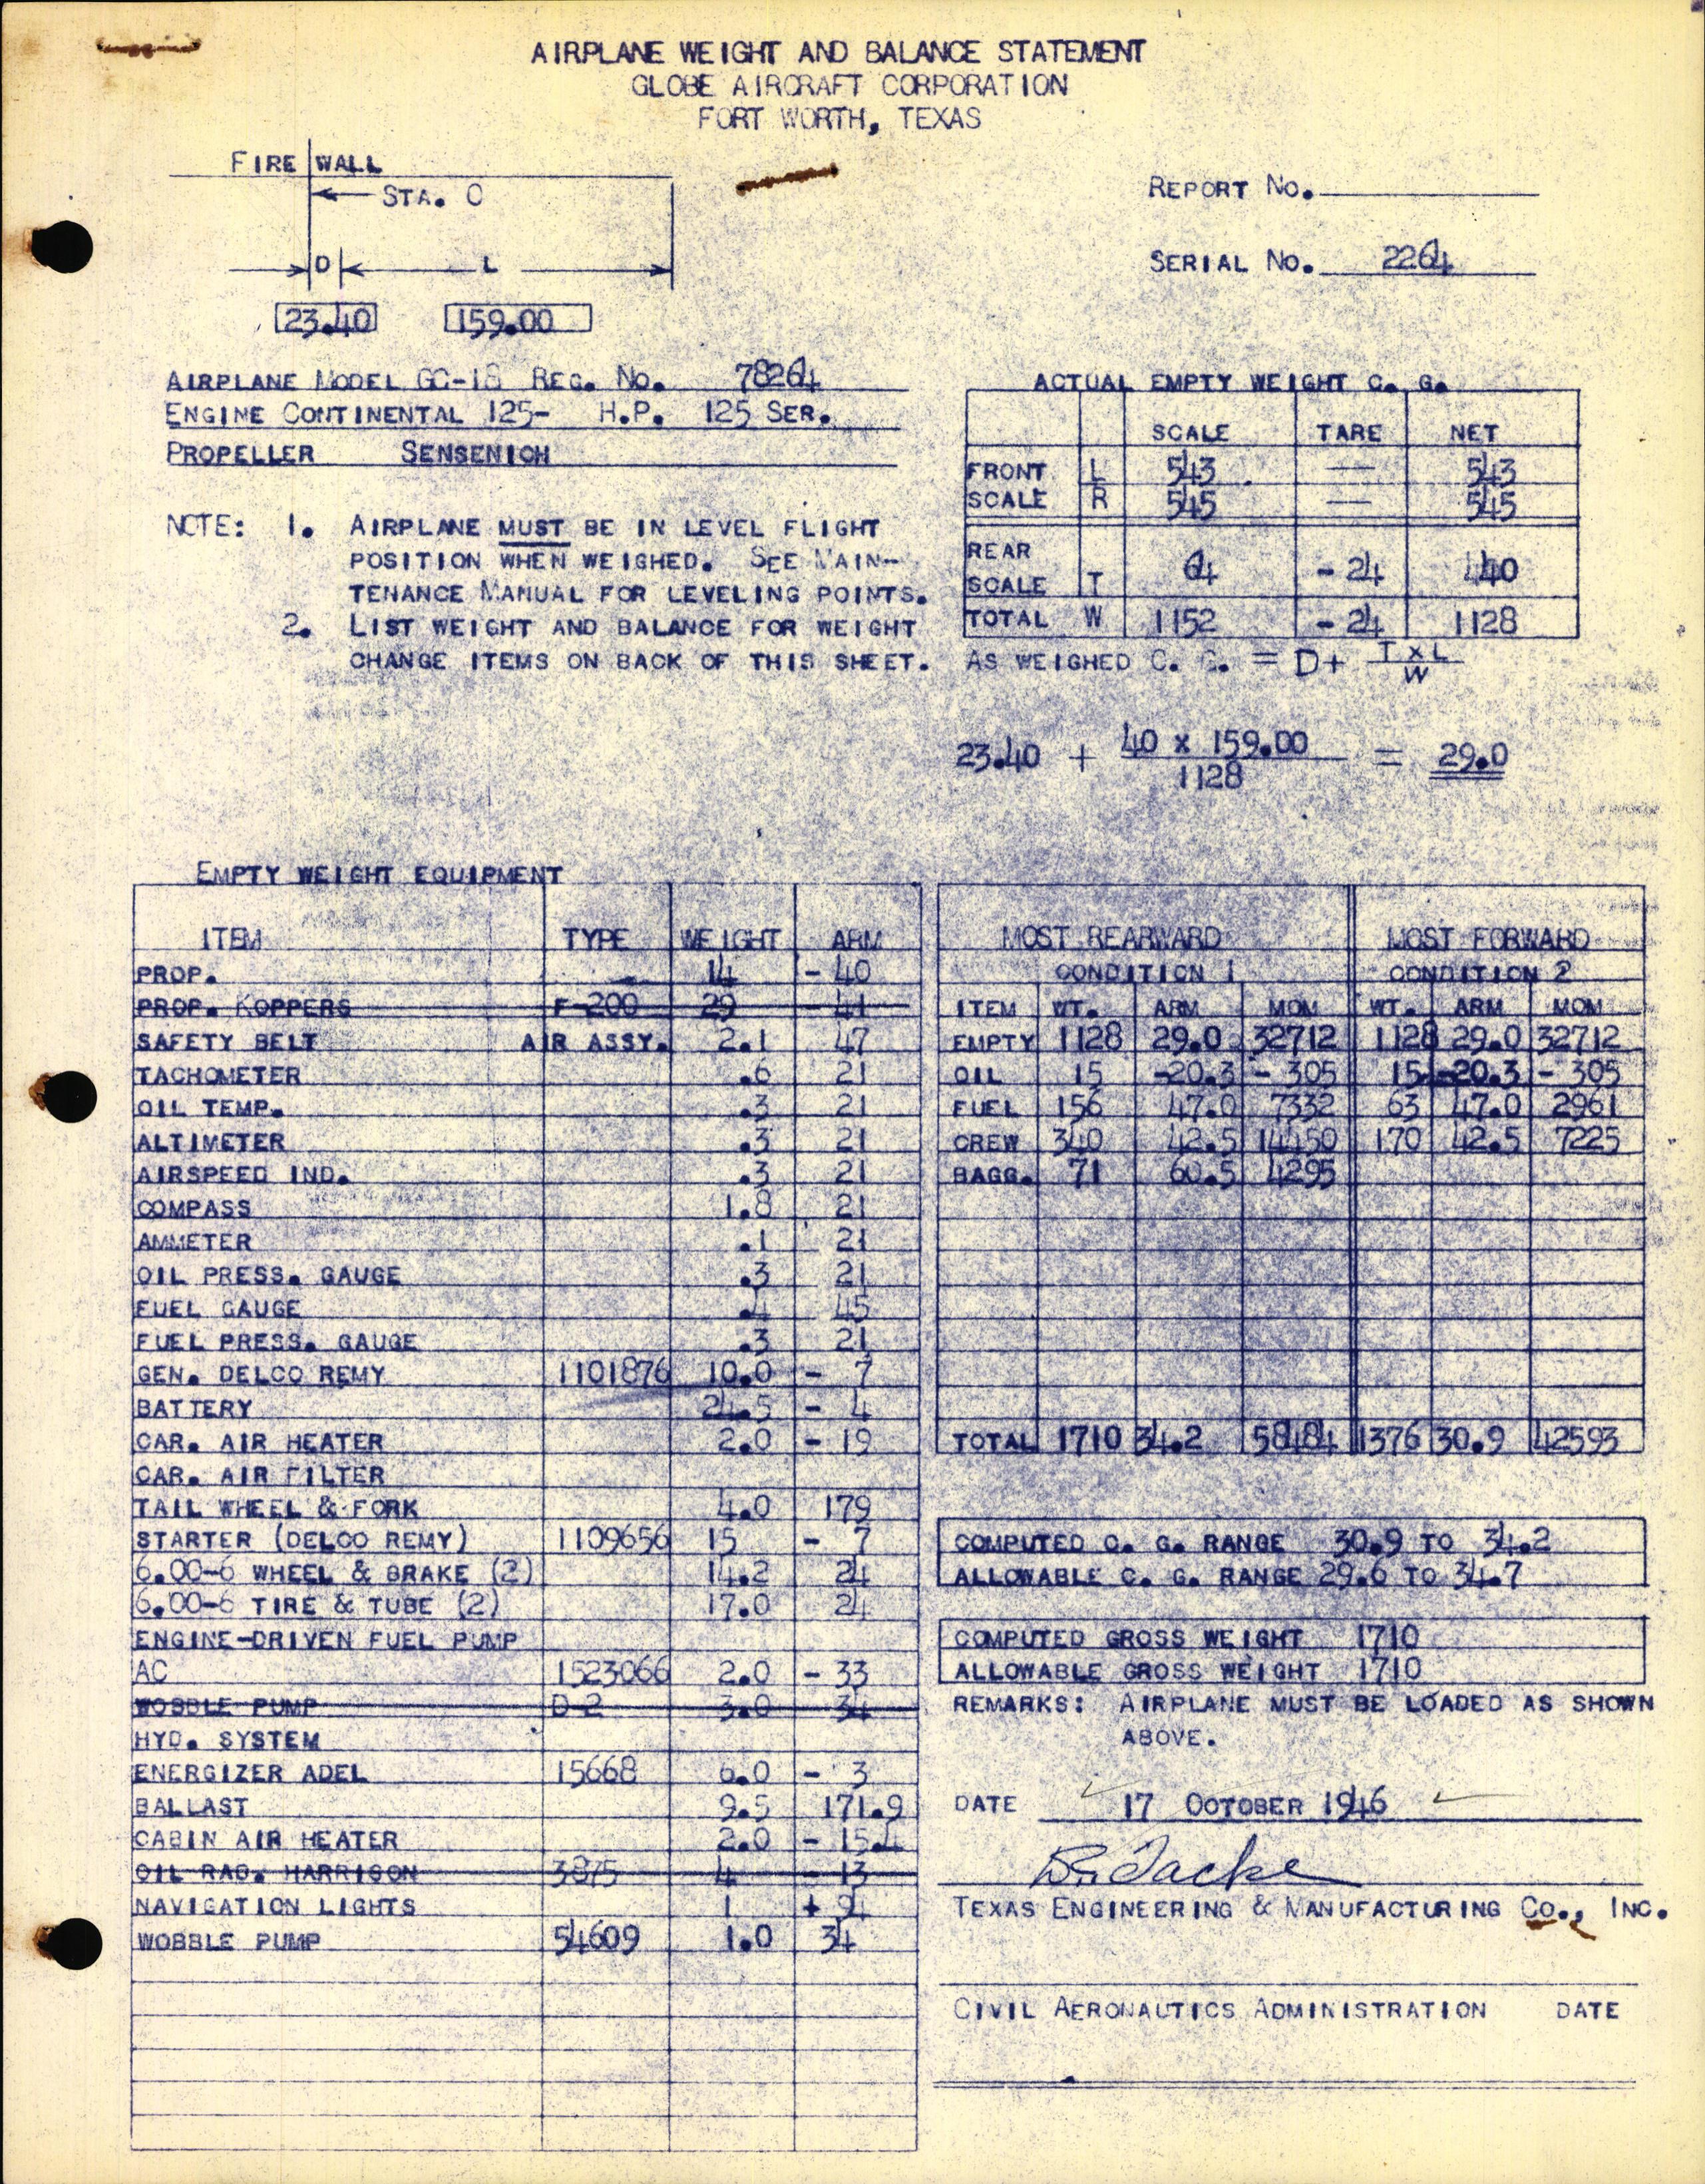 Sample page 1 from AirCorps Library document: Technical Information for Serial Number 2264